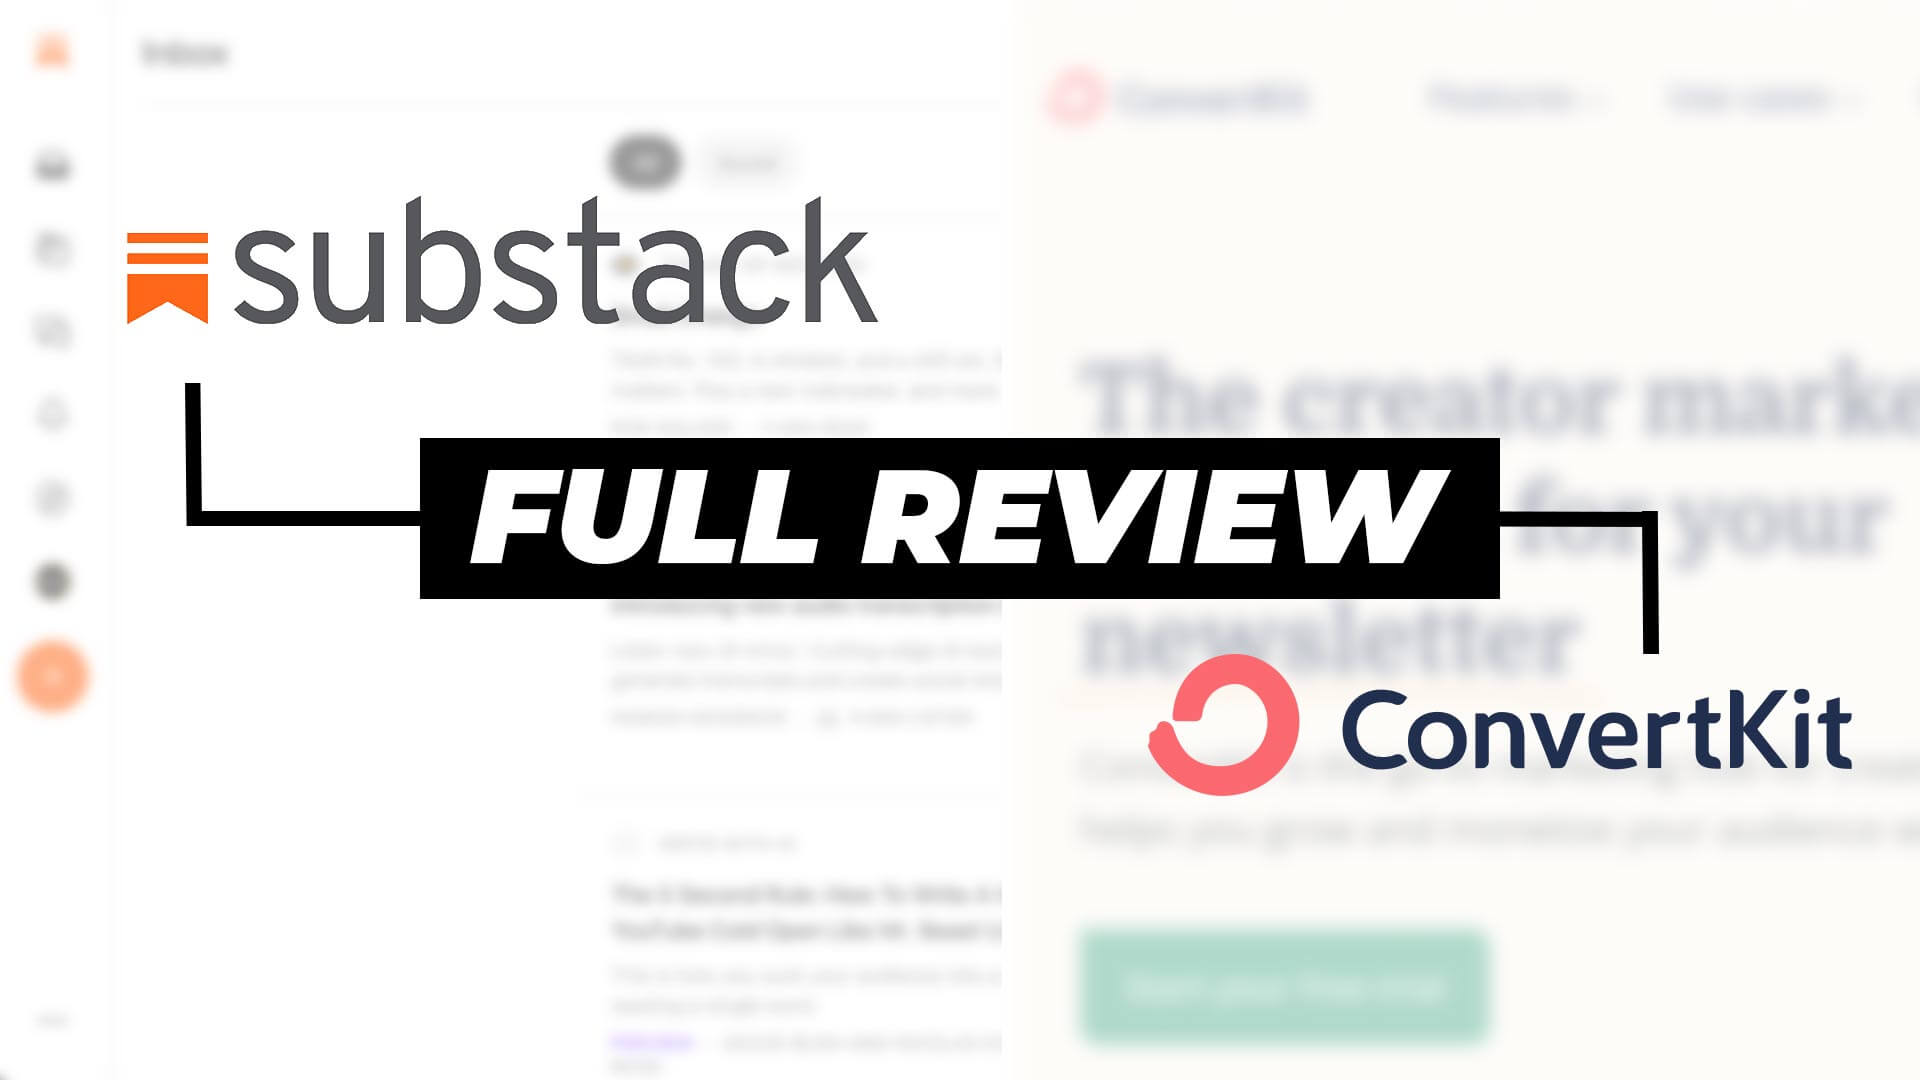 ConvertKit vs Substack: Which Platform Is Better to Build Your List?